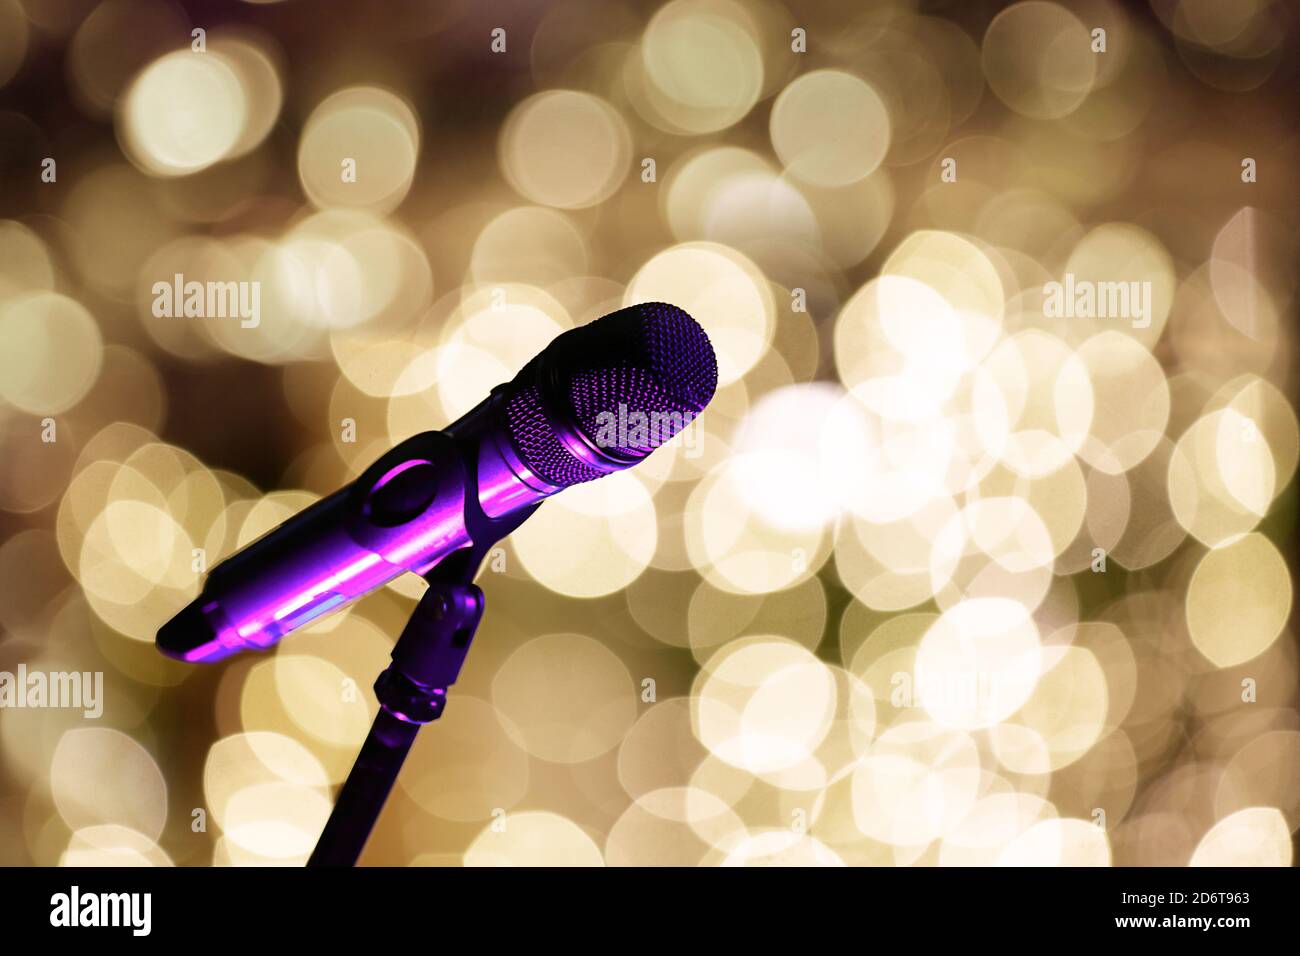 Microphone on stage in front of blurred lights and empty space for text Stock Photo